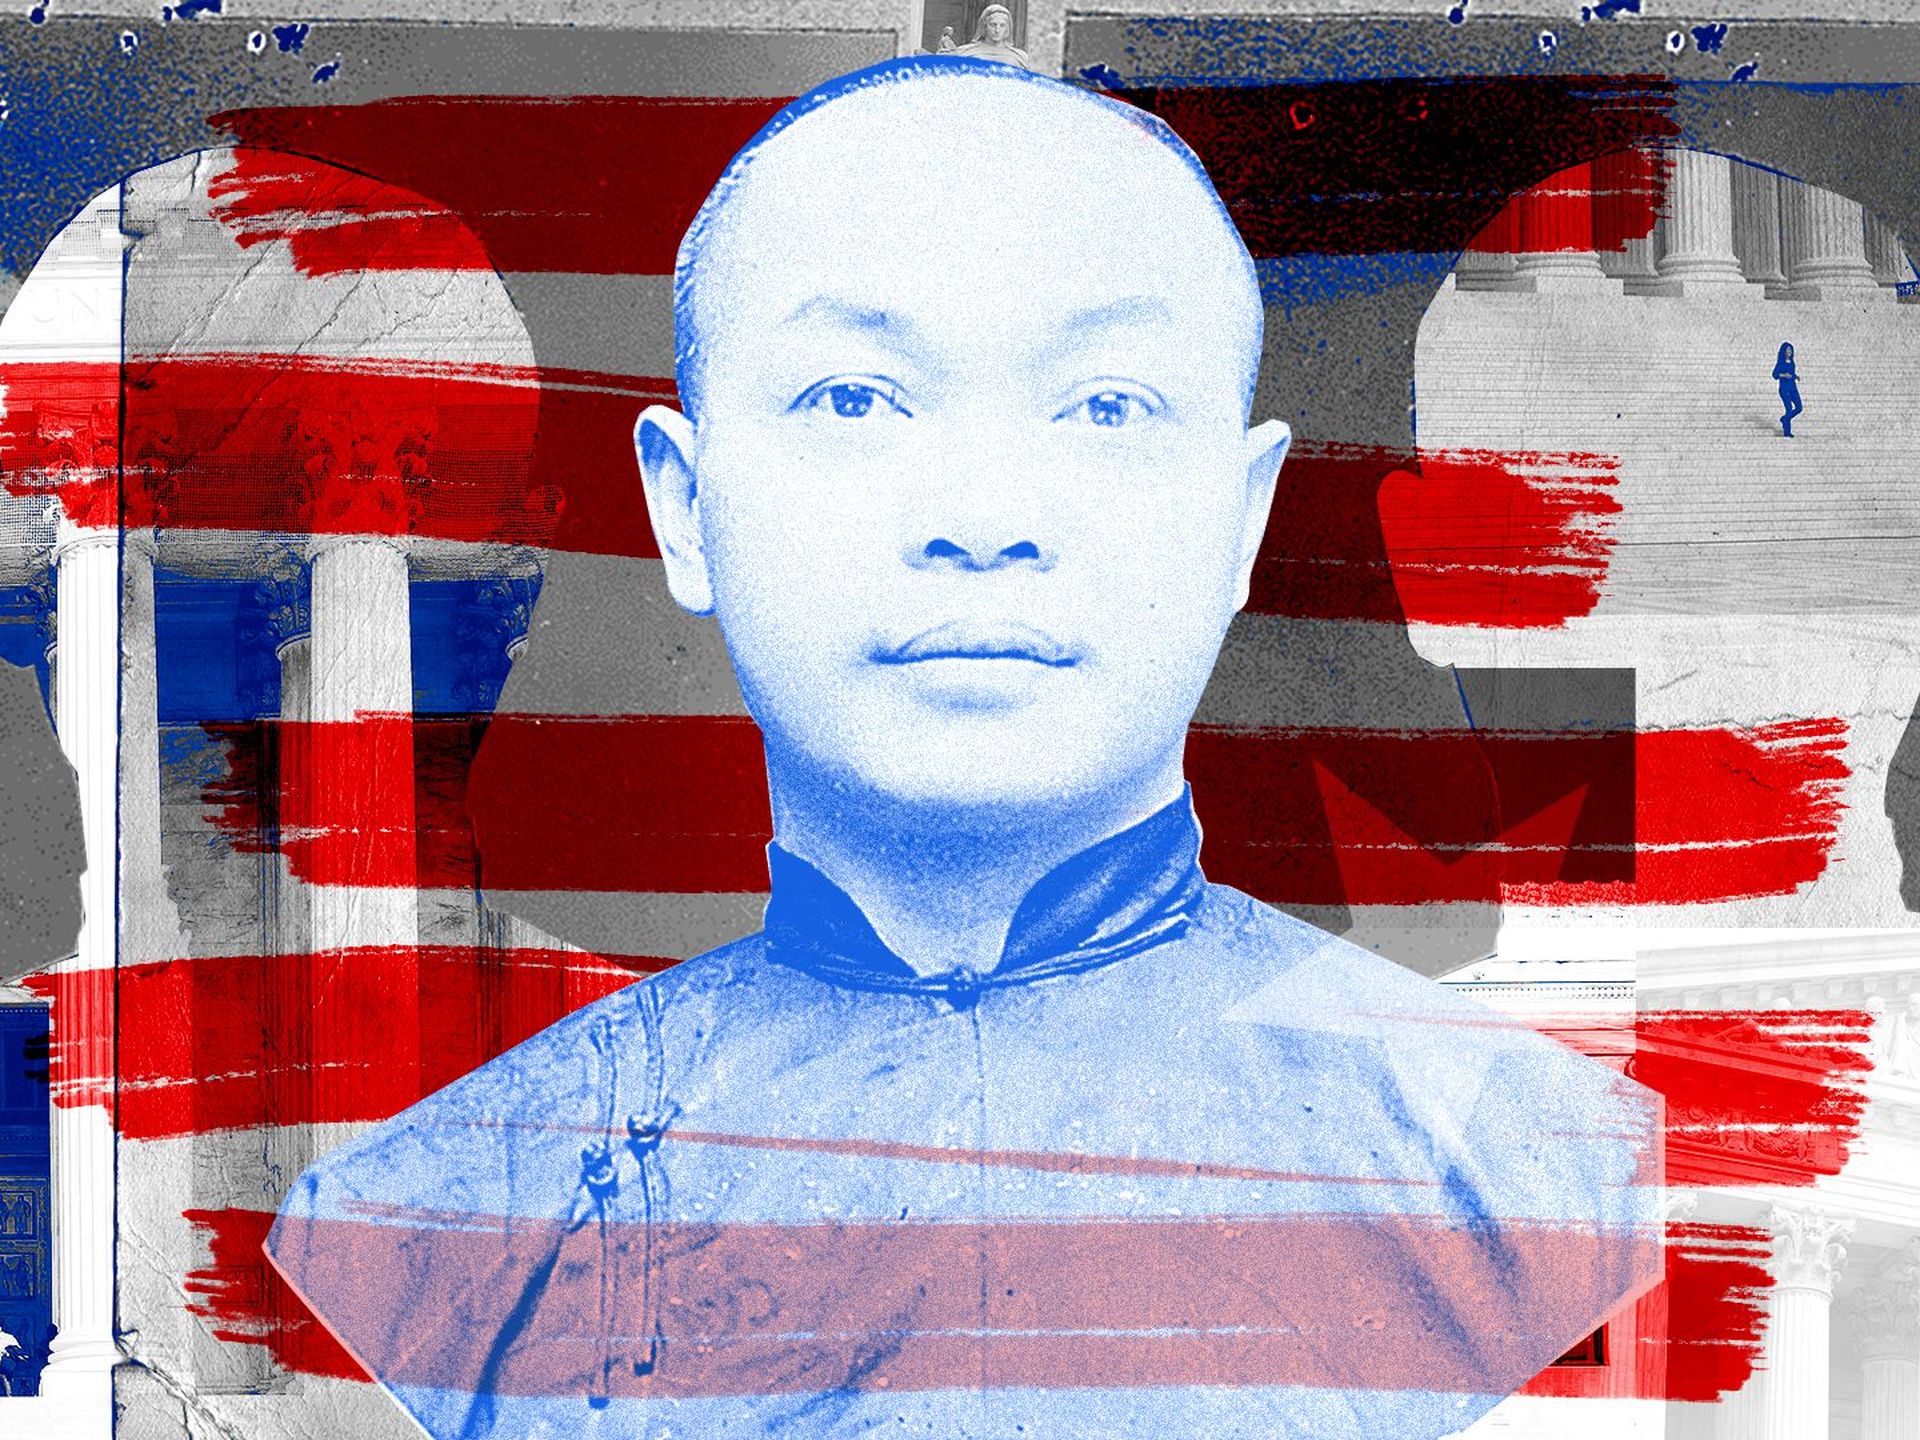 The 1898 moment: How Asian American activism transformed the U.S.